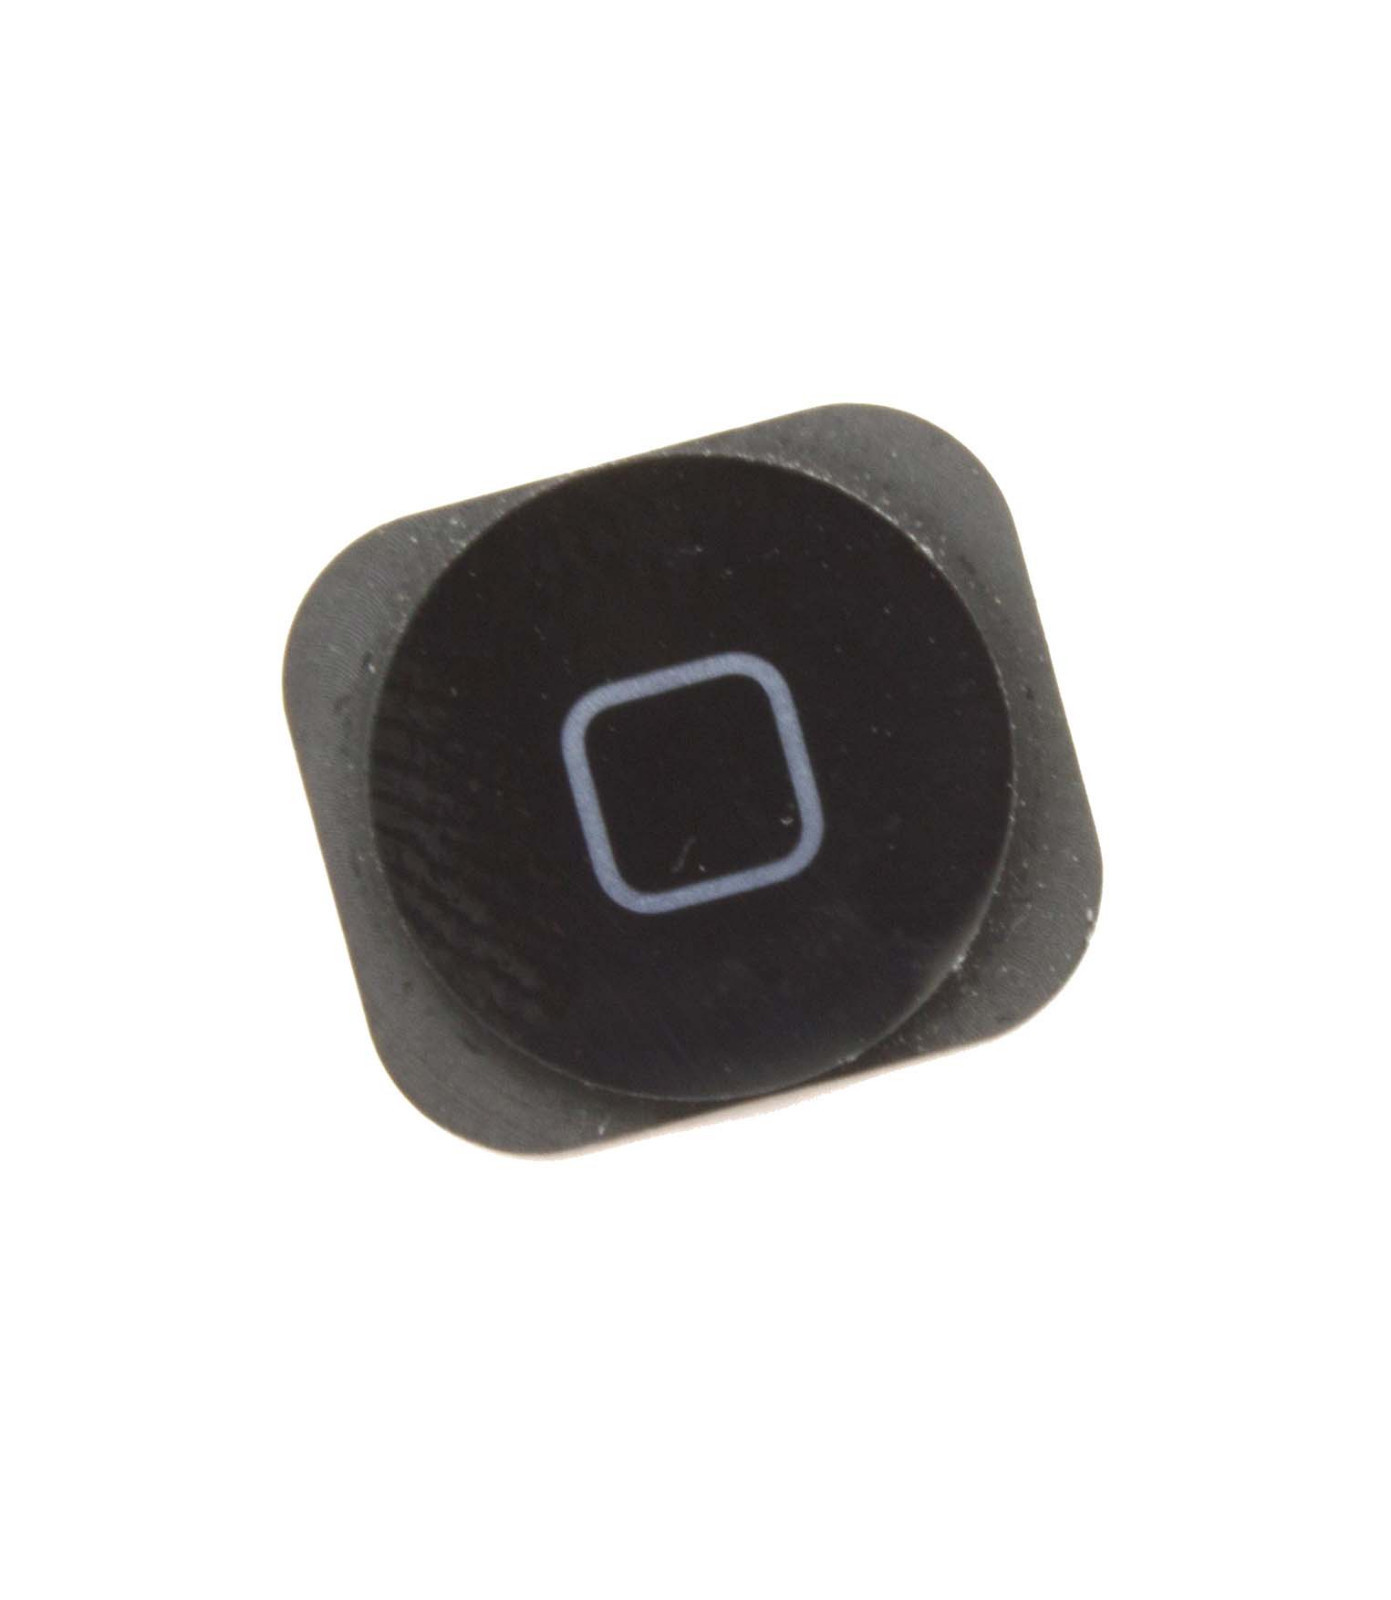 iPhone 5 home button black